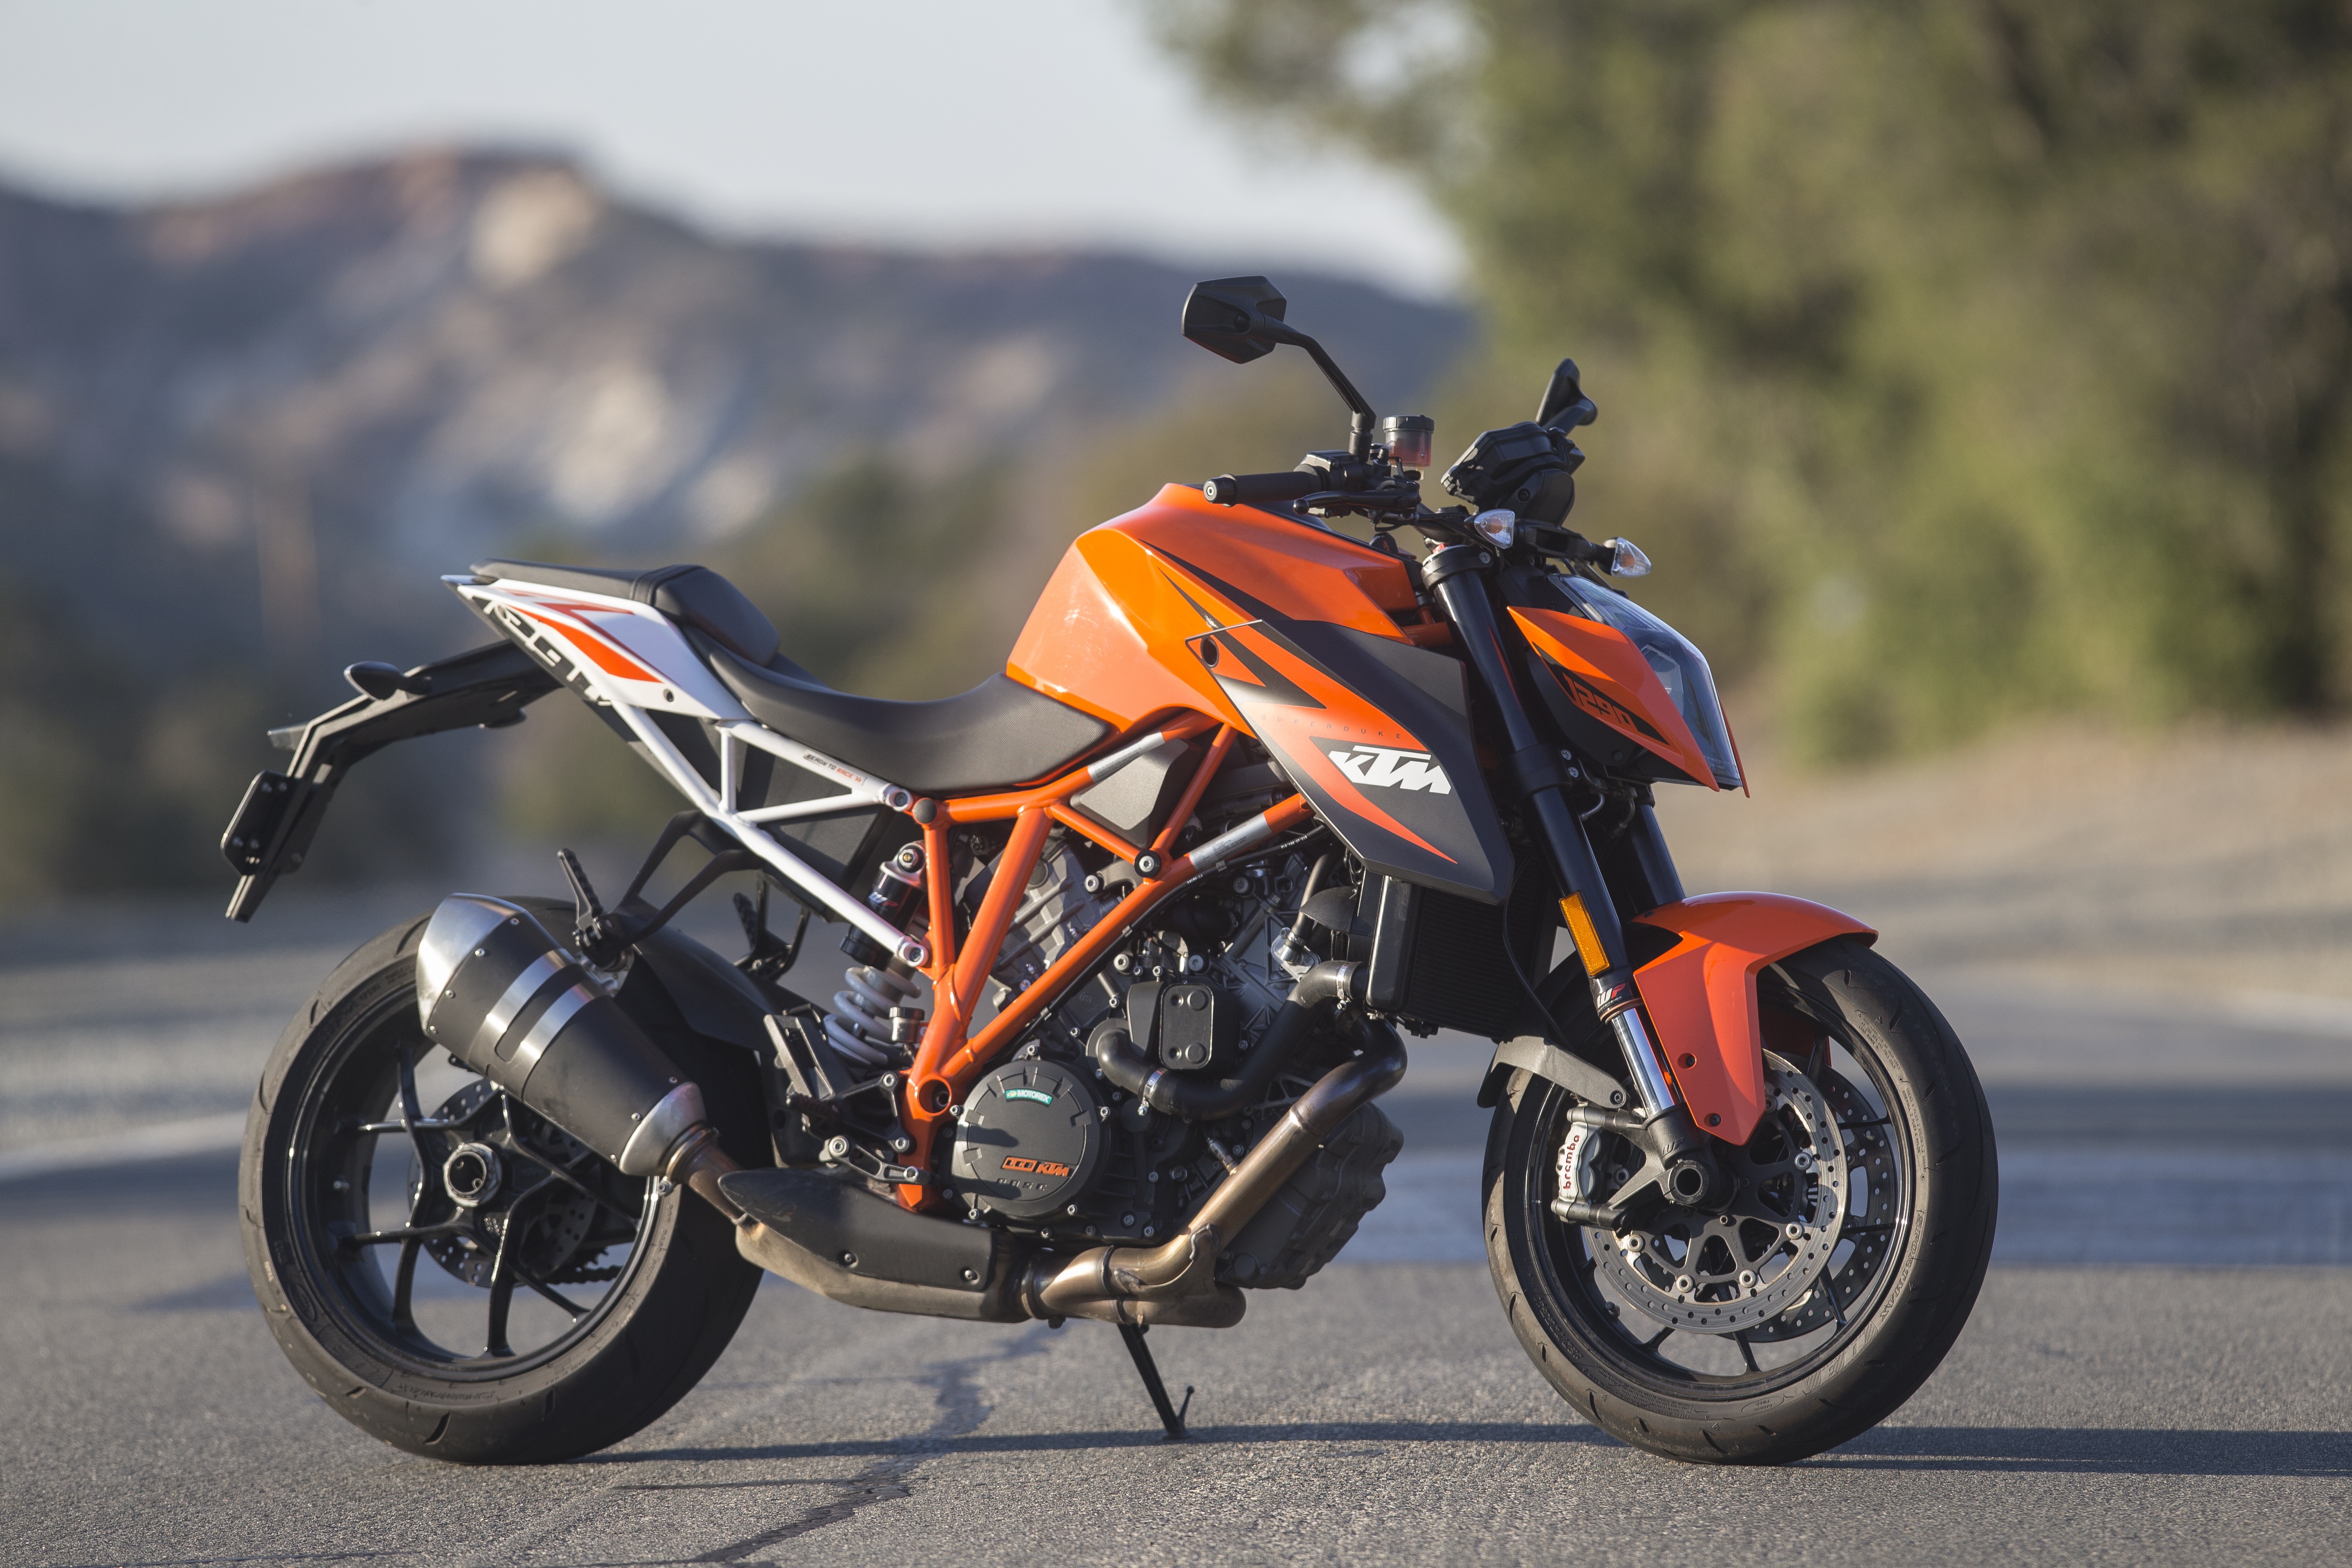 2016 KTM 1290 Super Duke R - WHAT I'VE BEEN RIDING | Cycle World